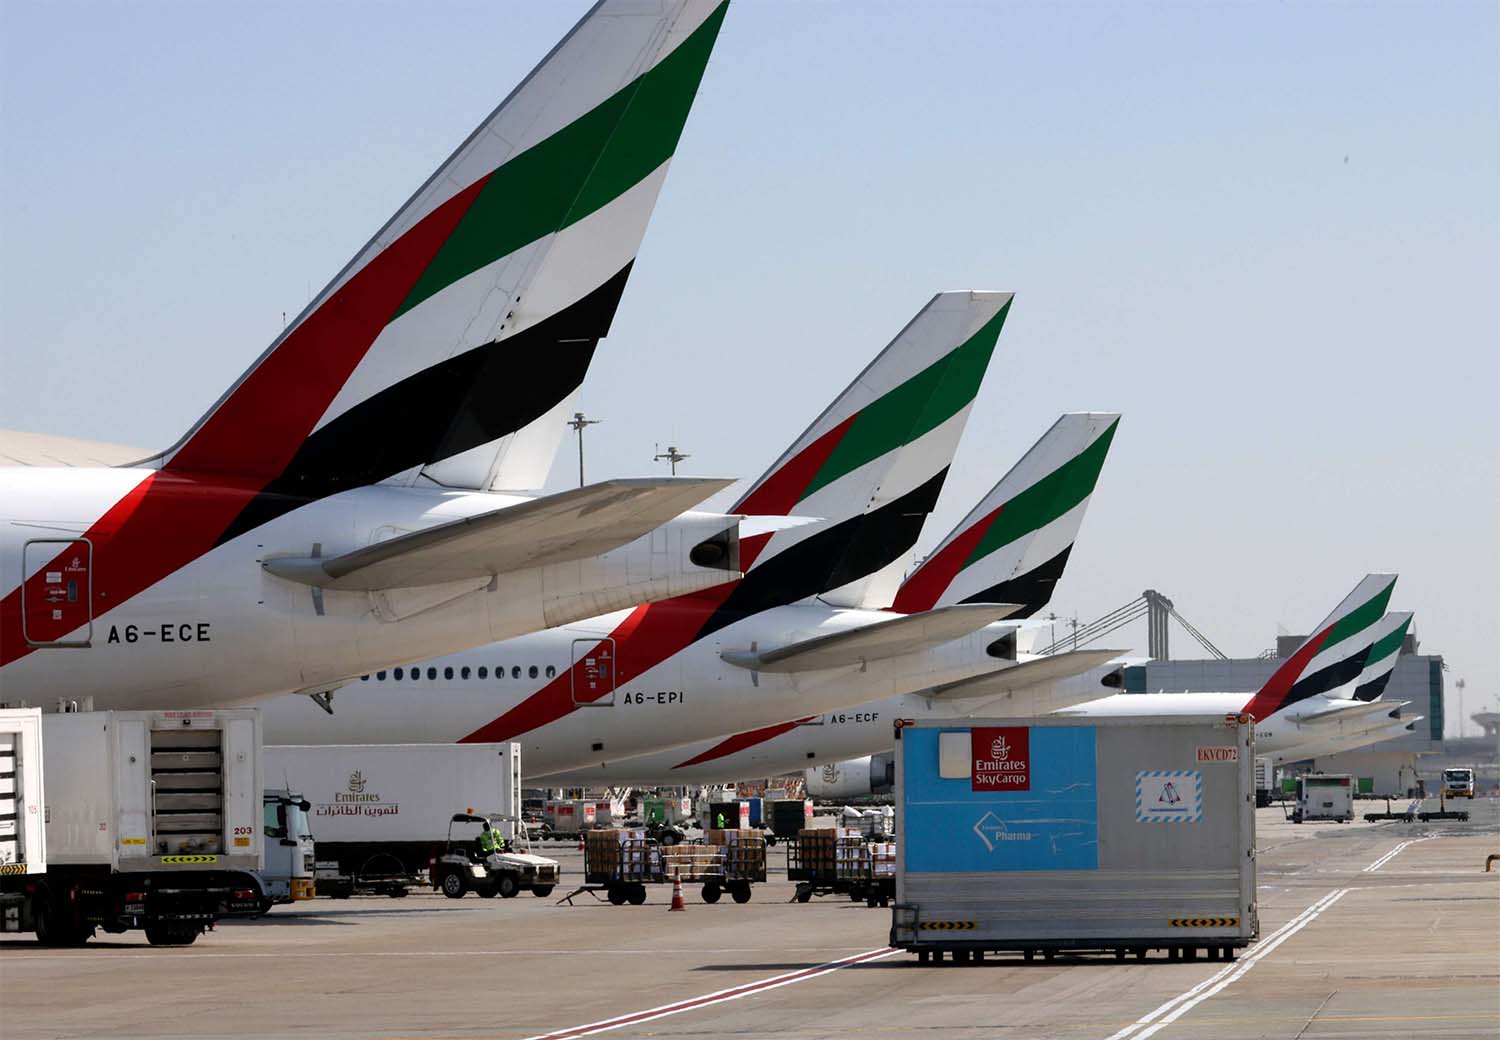 Most of Emirates' 118 Airbus A380 superjumbos remain grounded